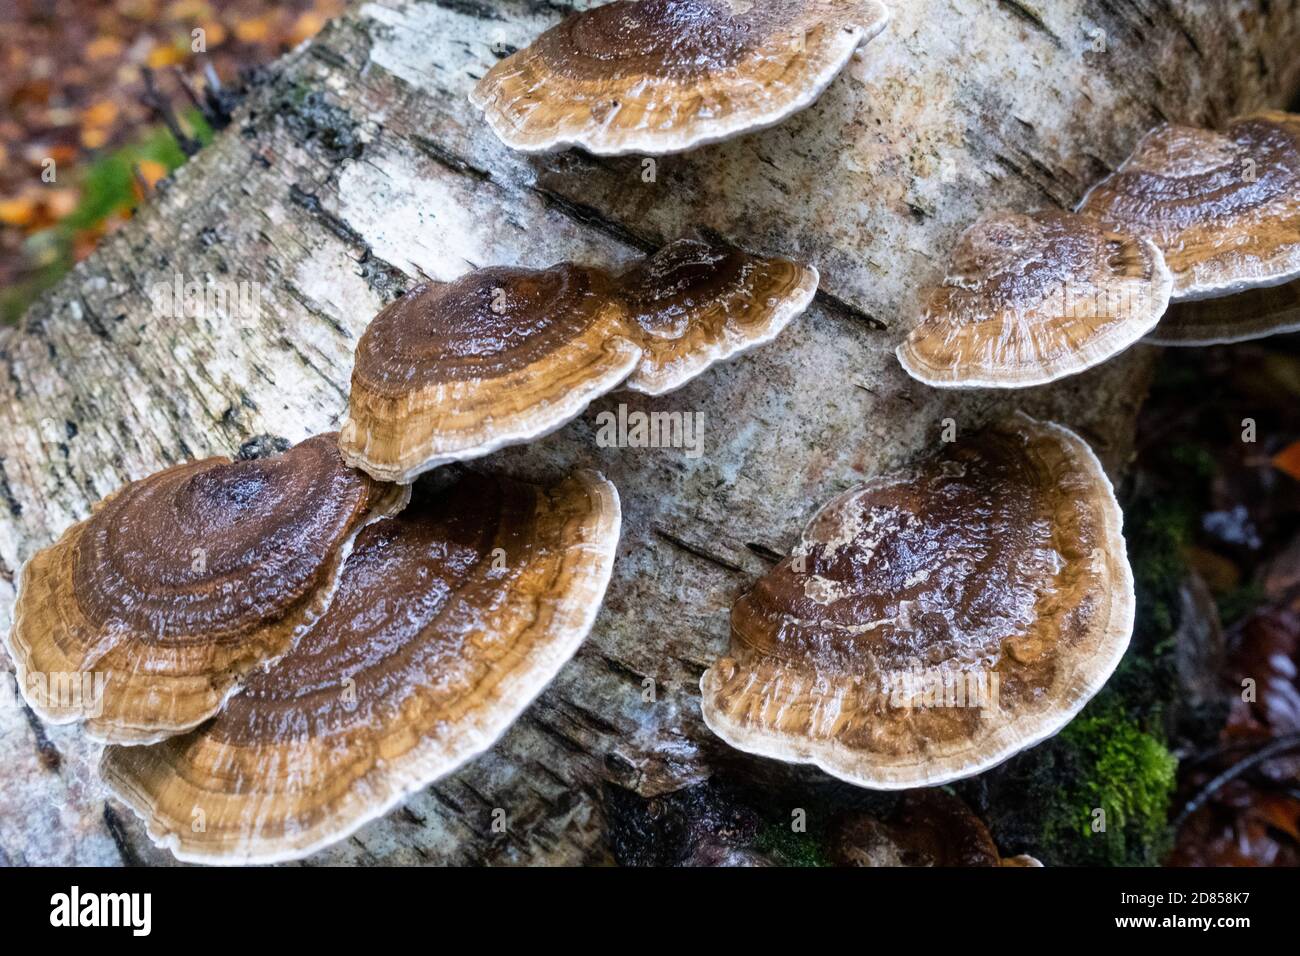 Large Turkey Tail fungi also known as coriolus versicolor and polyporus versicolor, trametes versicolor, spotted in the New Forest, UK. Stock Photo